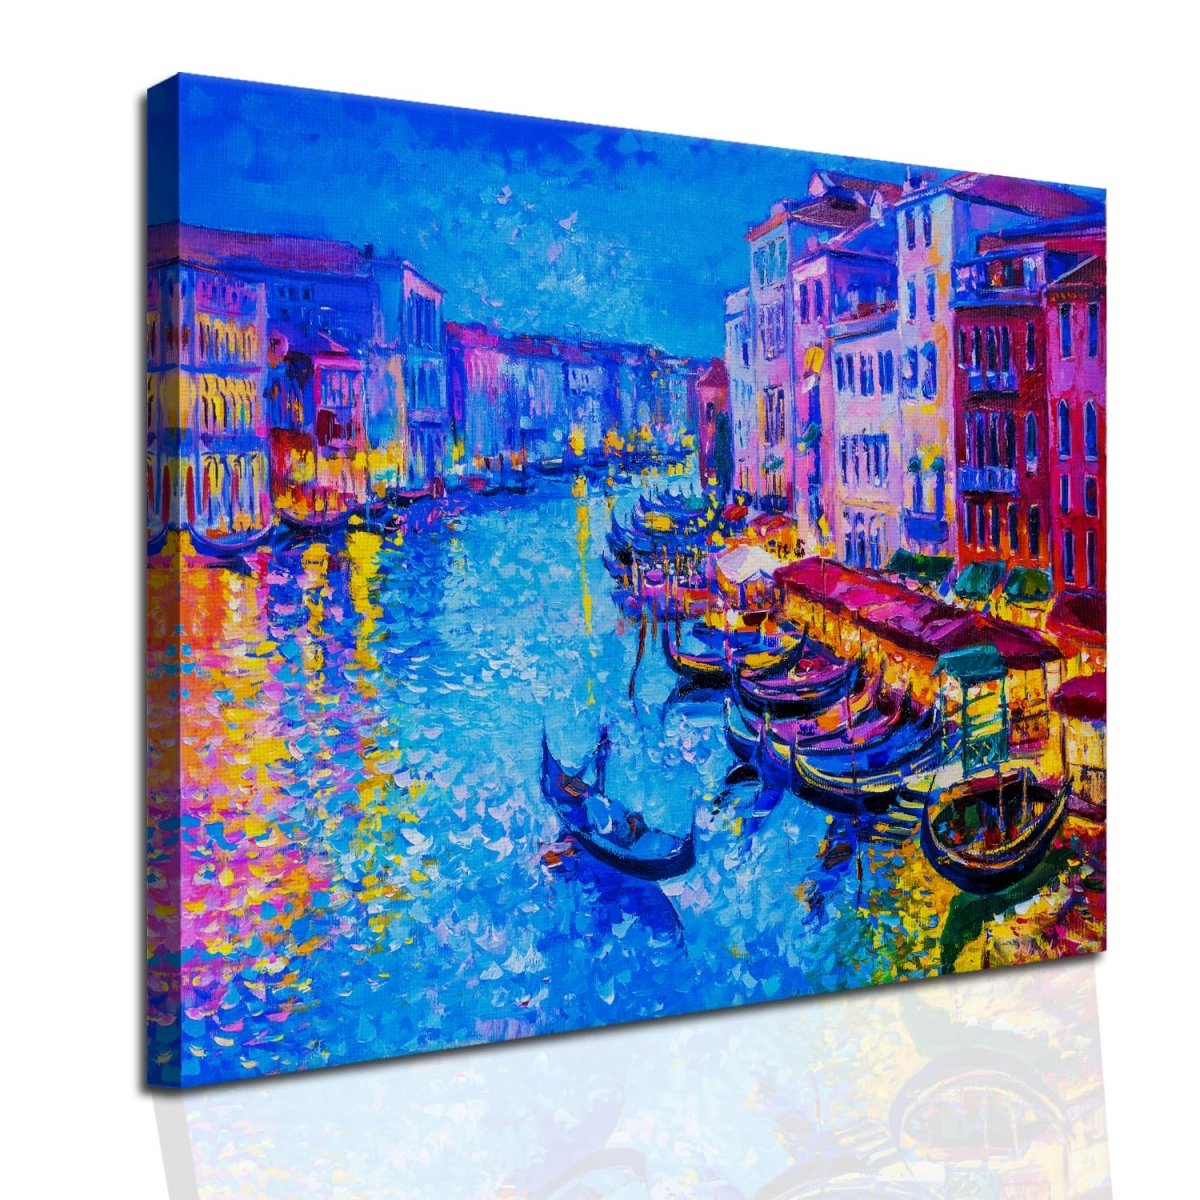 Venice at Sunset Canvas Wall Art (48 x 36 Inches)